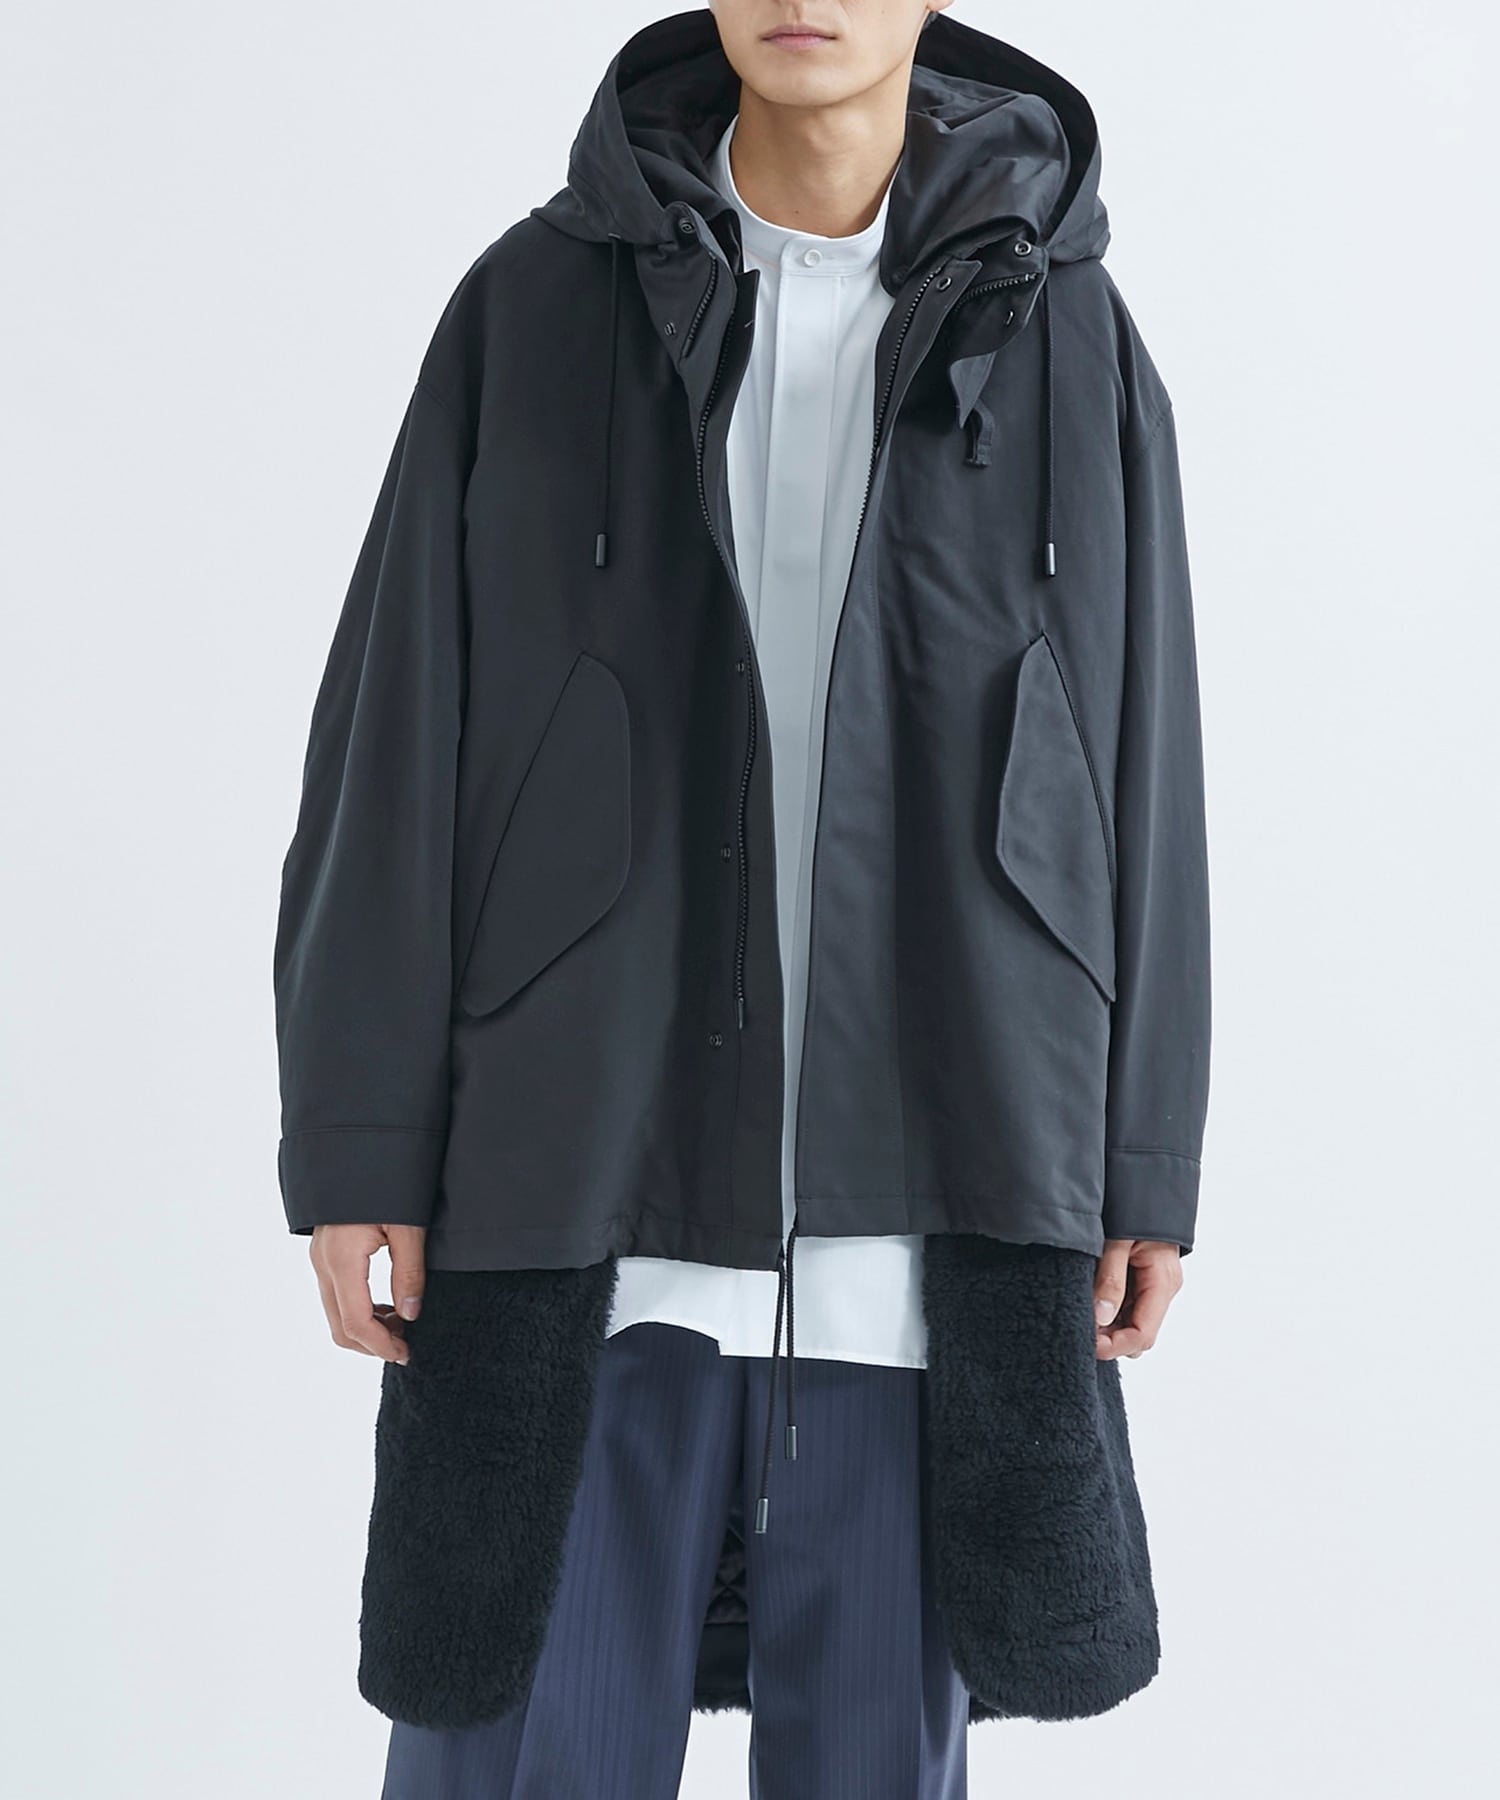 THE MODS COAT WITH LINER